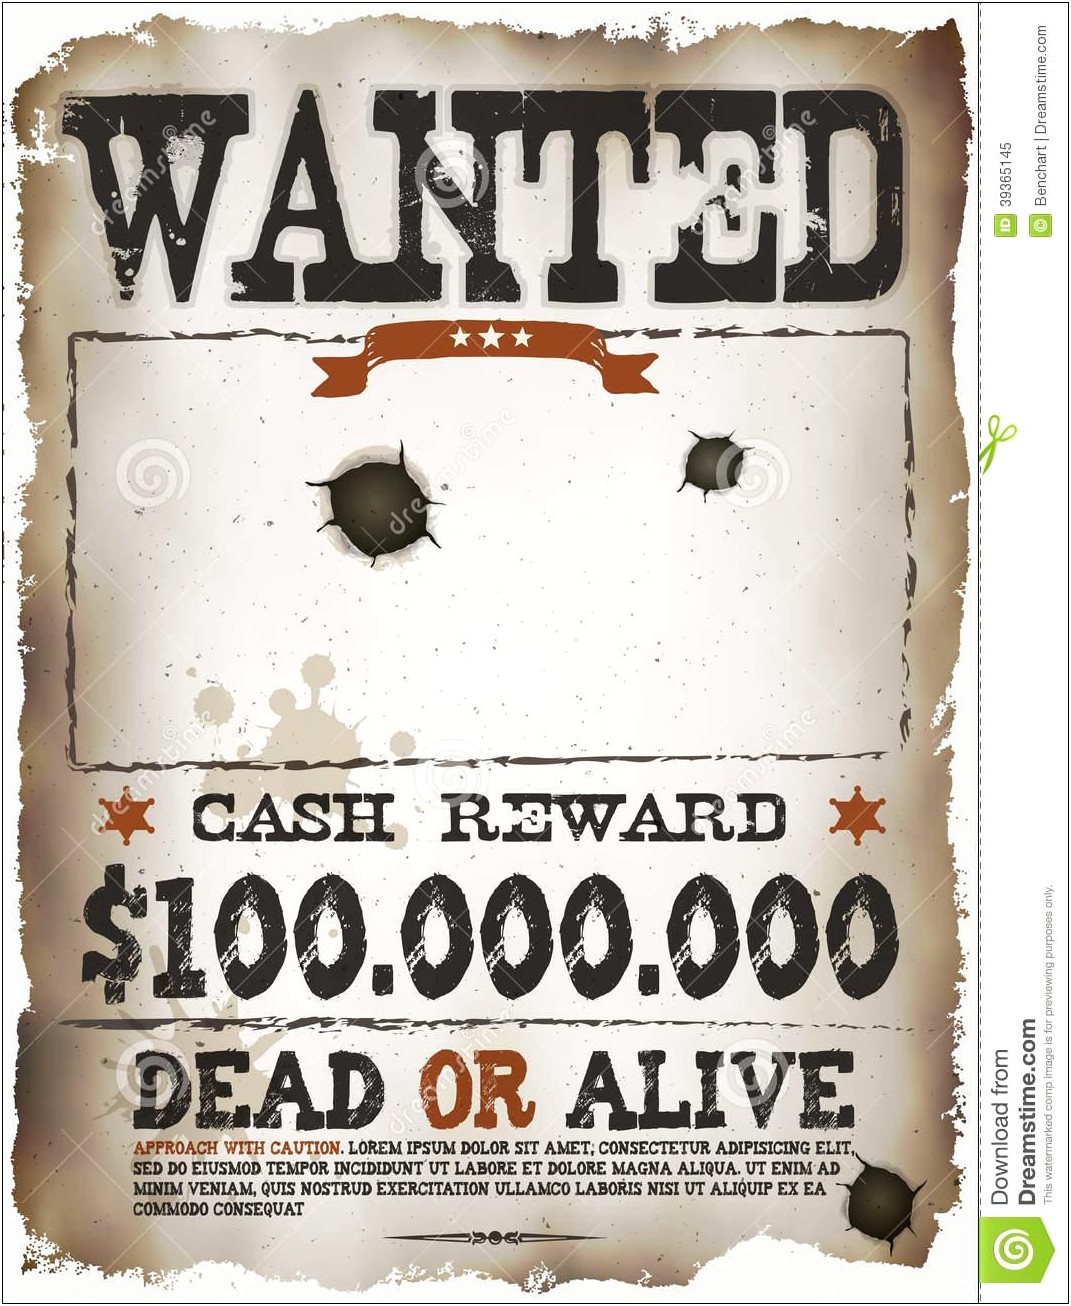 Wanted Dead Or Alive Template For Word